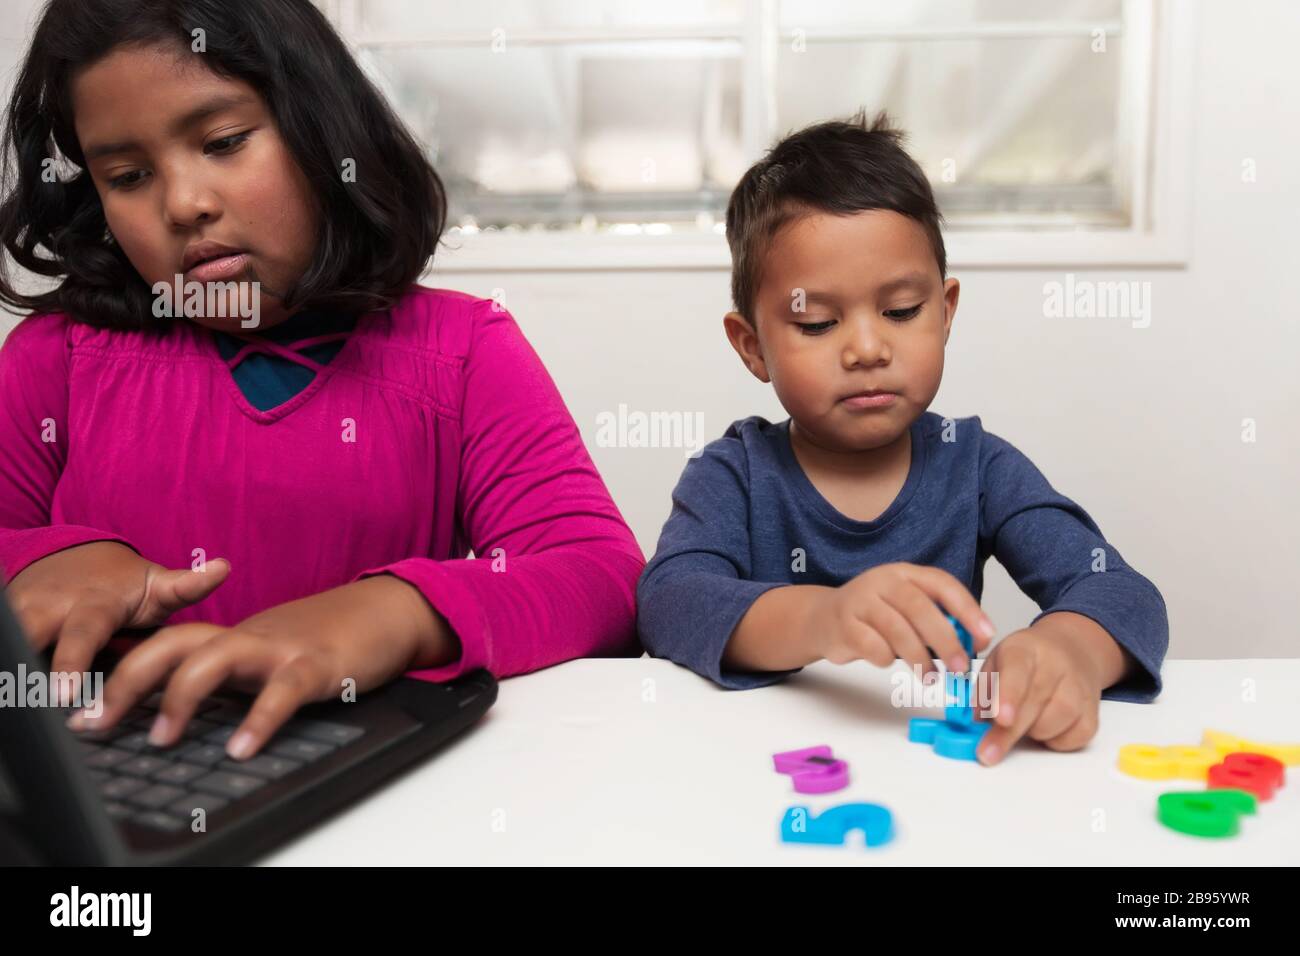 Children in home based learning, with the older sister typing on a laptop while her little brother plays with colorful number manipulatives. Stock Photo